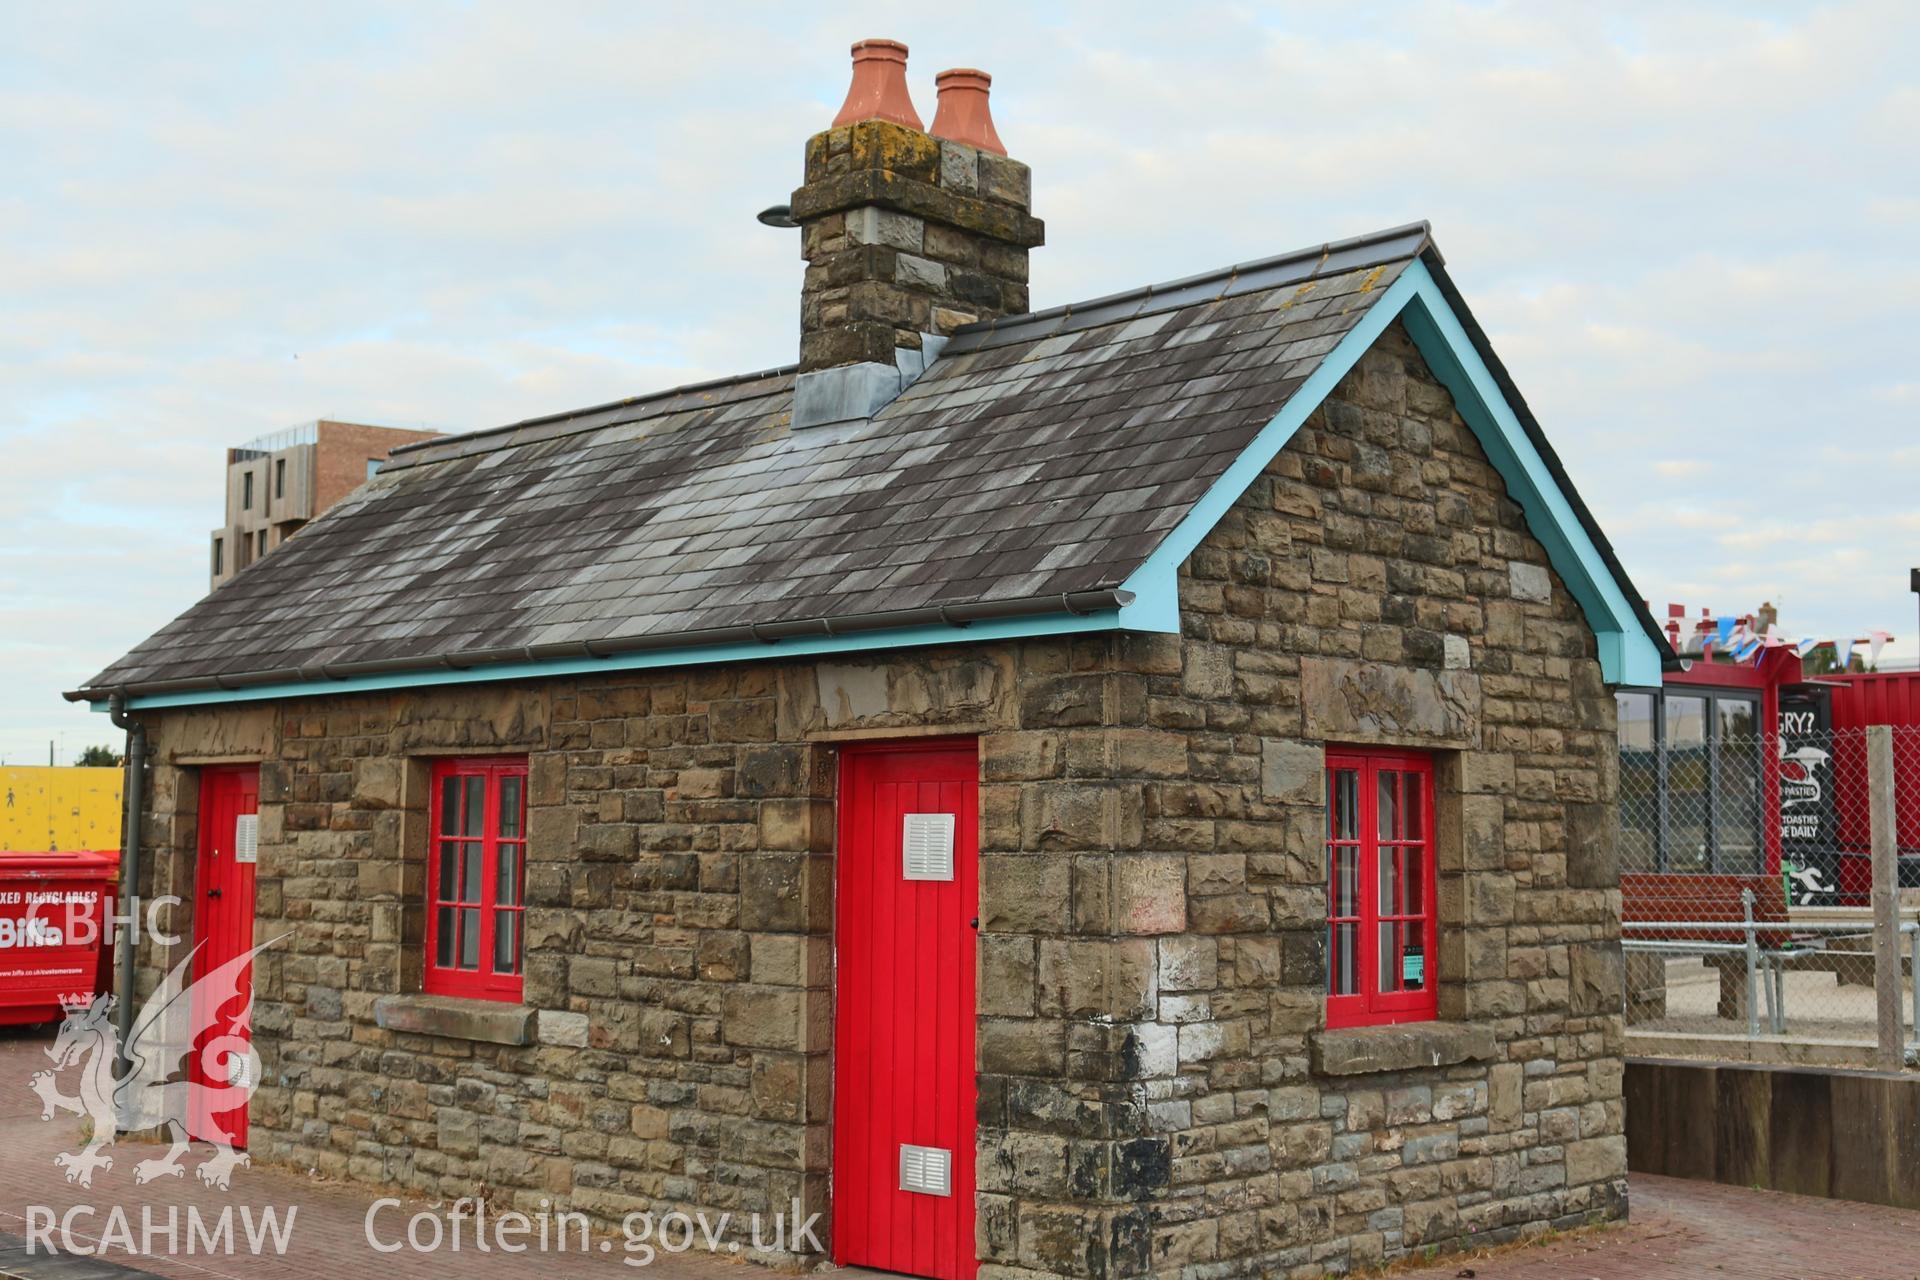 Colour photograph showing exterior of a Lock Keeper's cottage at Roath Basin, Butetown, Cardiff. Photographed during survey conducted by Adam N. Coward on 17th July 2018.